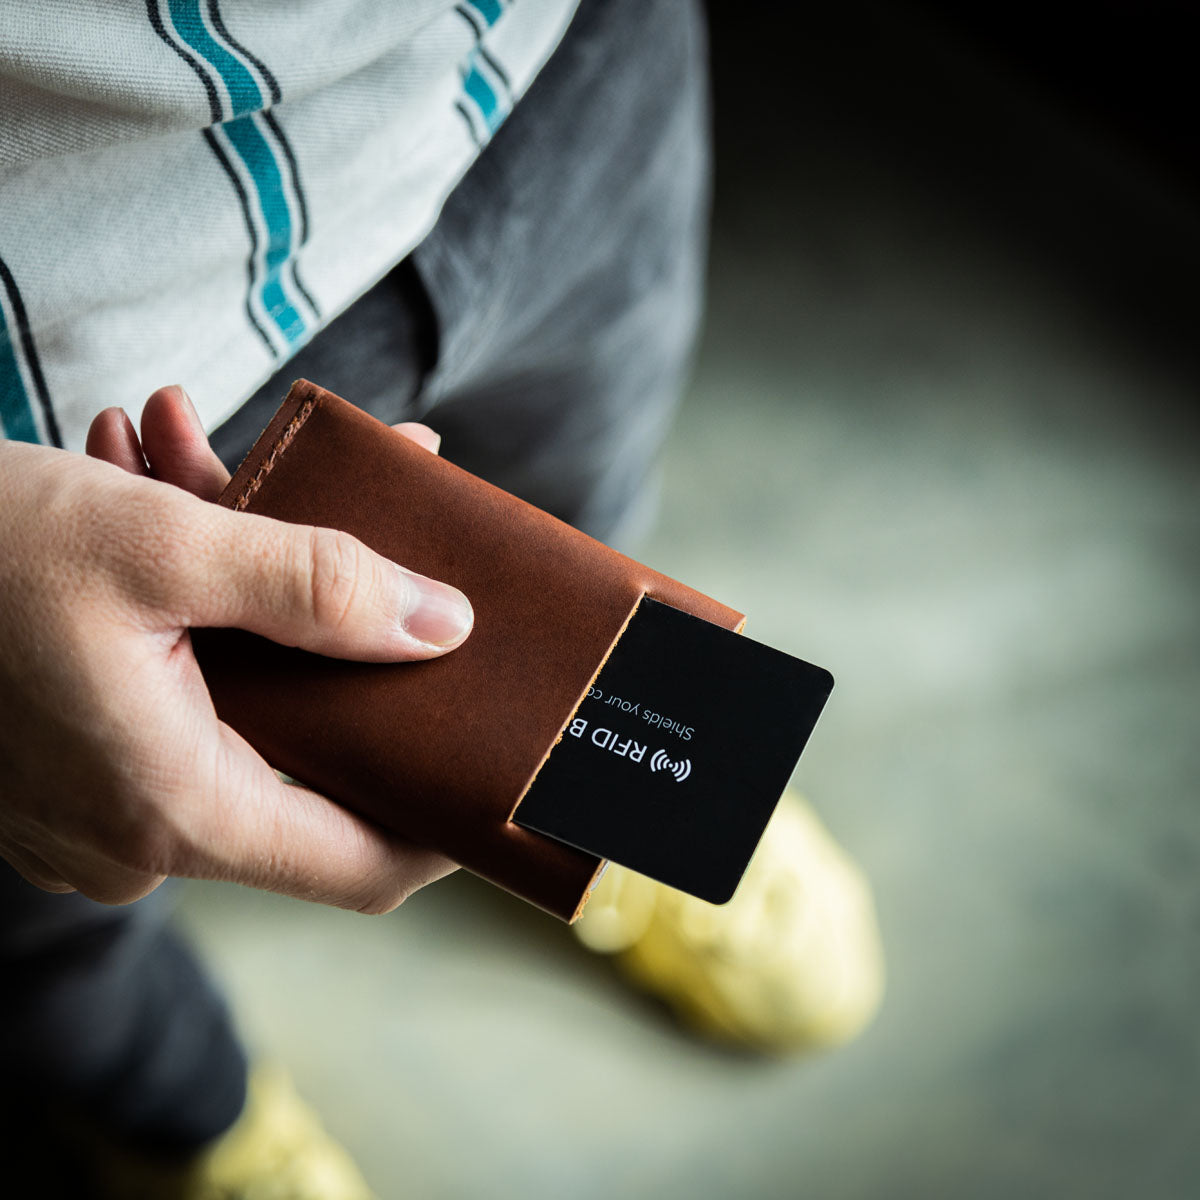 Rustico Voyager Leather Wallet